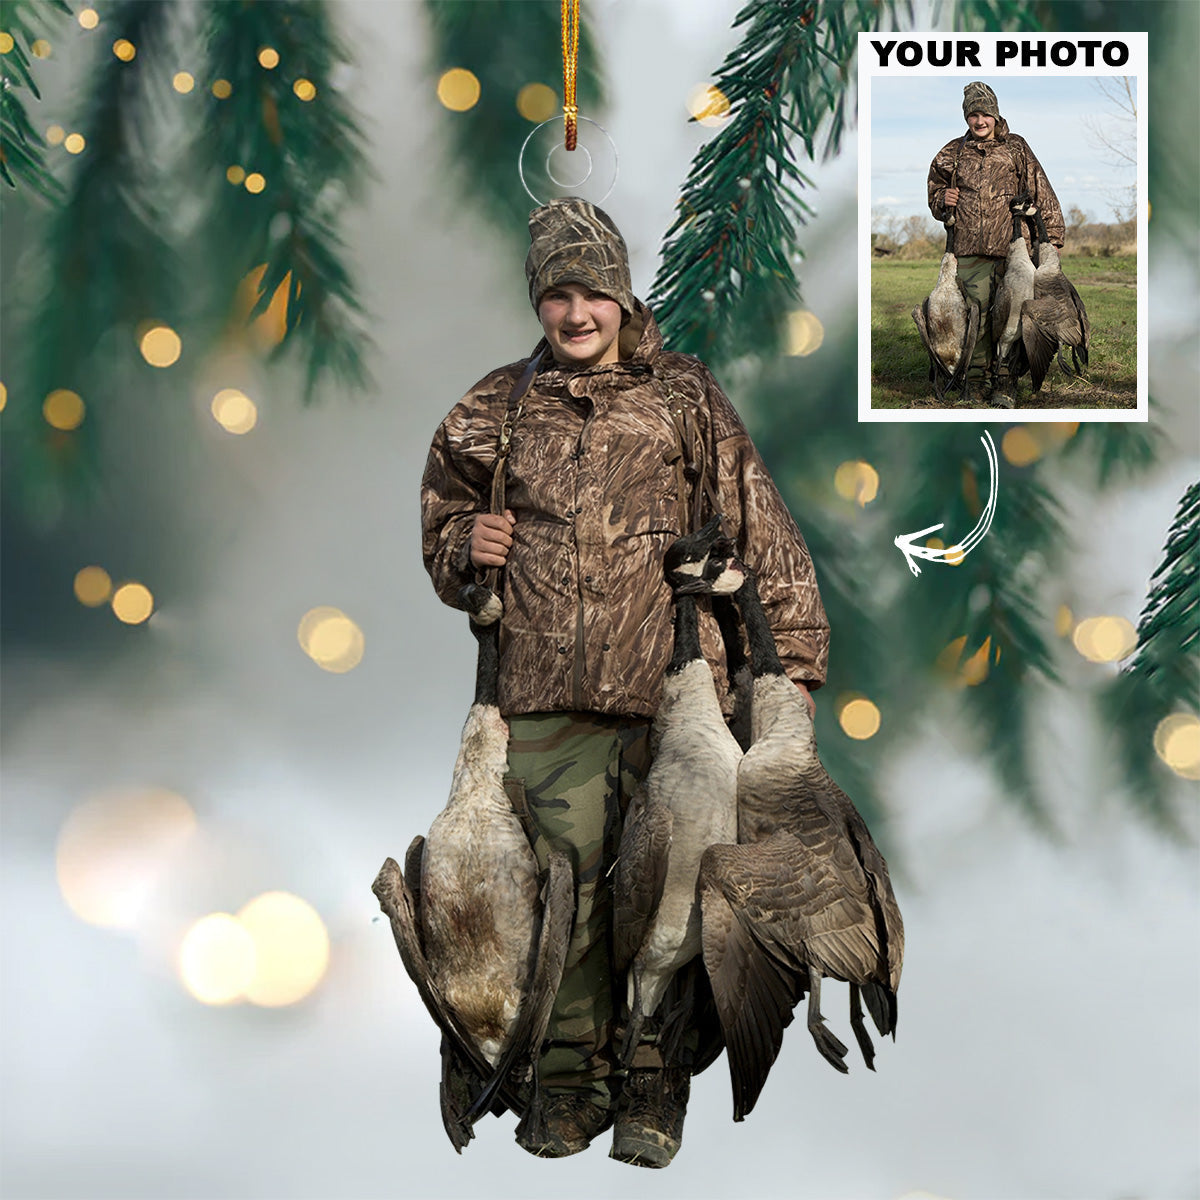 Personalized Master Hunter Photo Ornament - Personalized Photo Bird Hunting - Customized Your Photo Ornament - Christmas Gift For Hunting Lovers, Bird Hunters